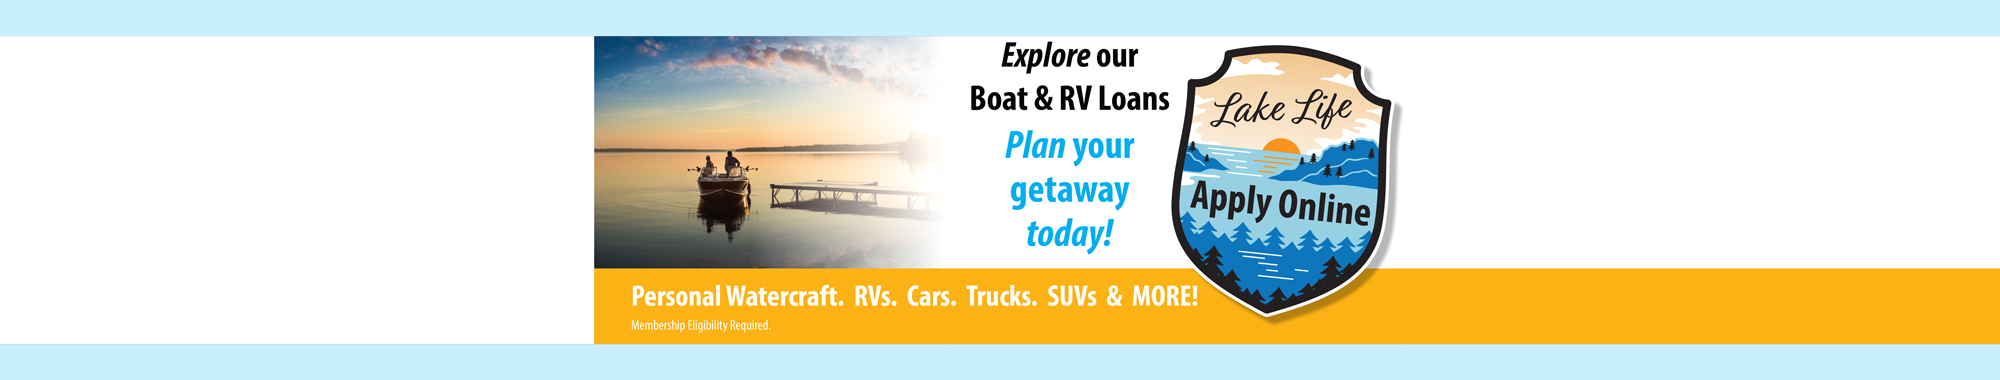 Explore our Boat & RV Loans -  Plan your getaway today! Personal watercraft, RVs, Cars, Trucks, SUVs and MORE! Lake Life - Apply Online!